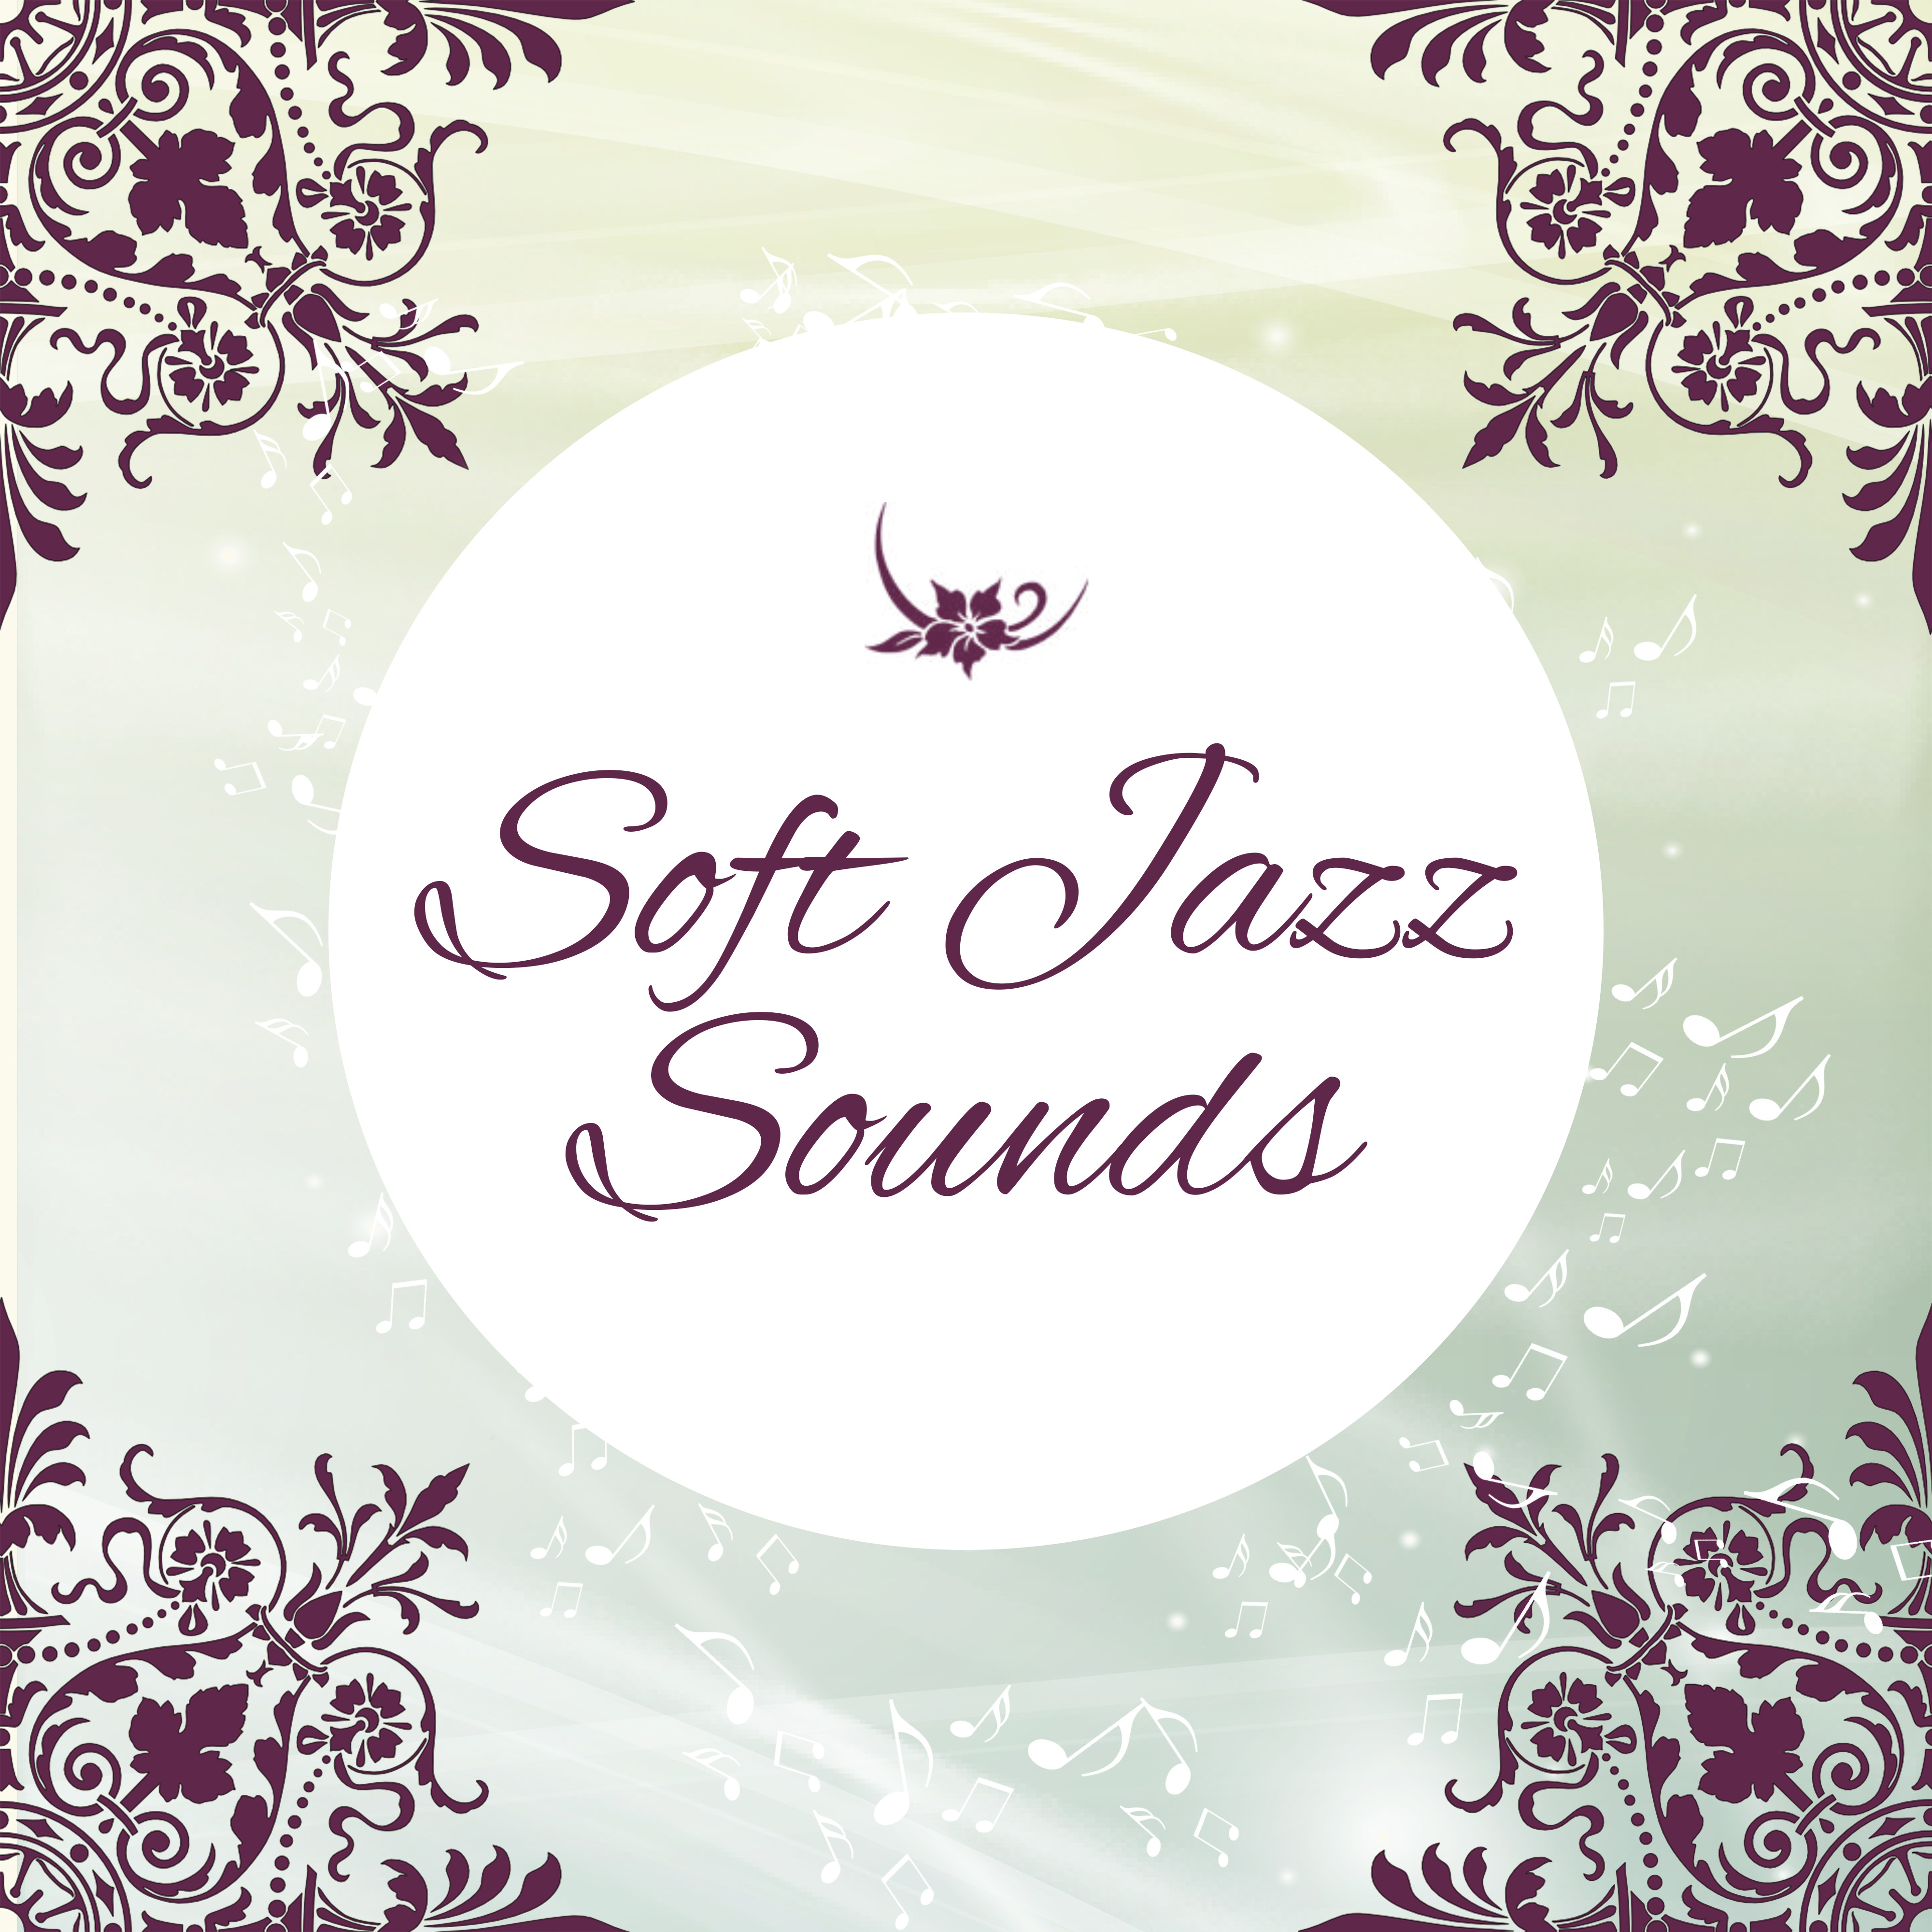 Soft Jazz Sounds  Blue Moon, Evening Jazz Club, Relaxing Smooth Piano